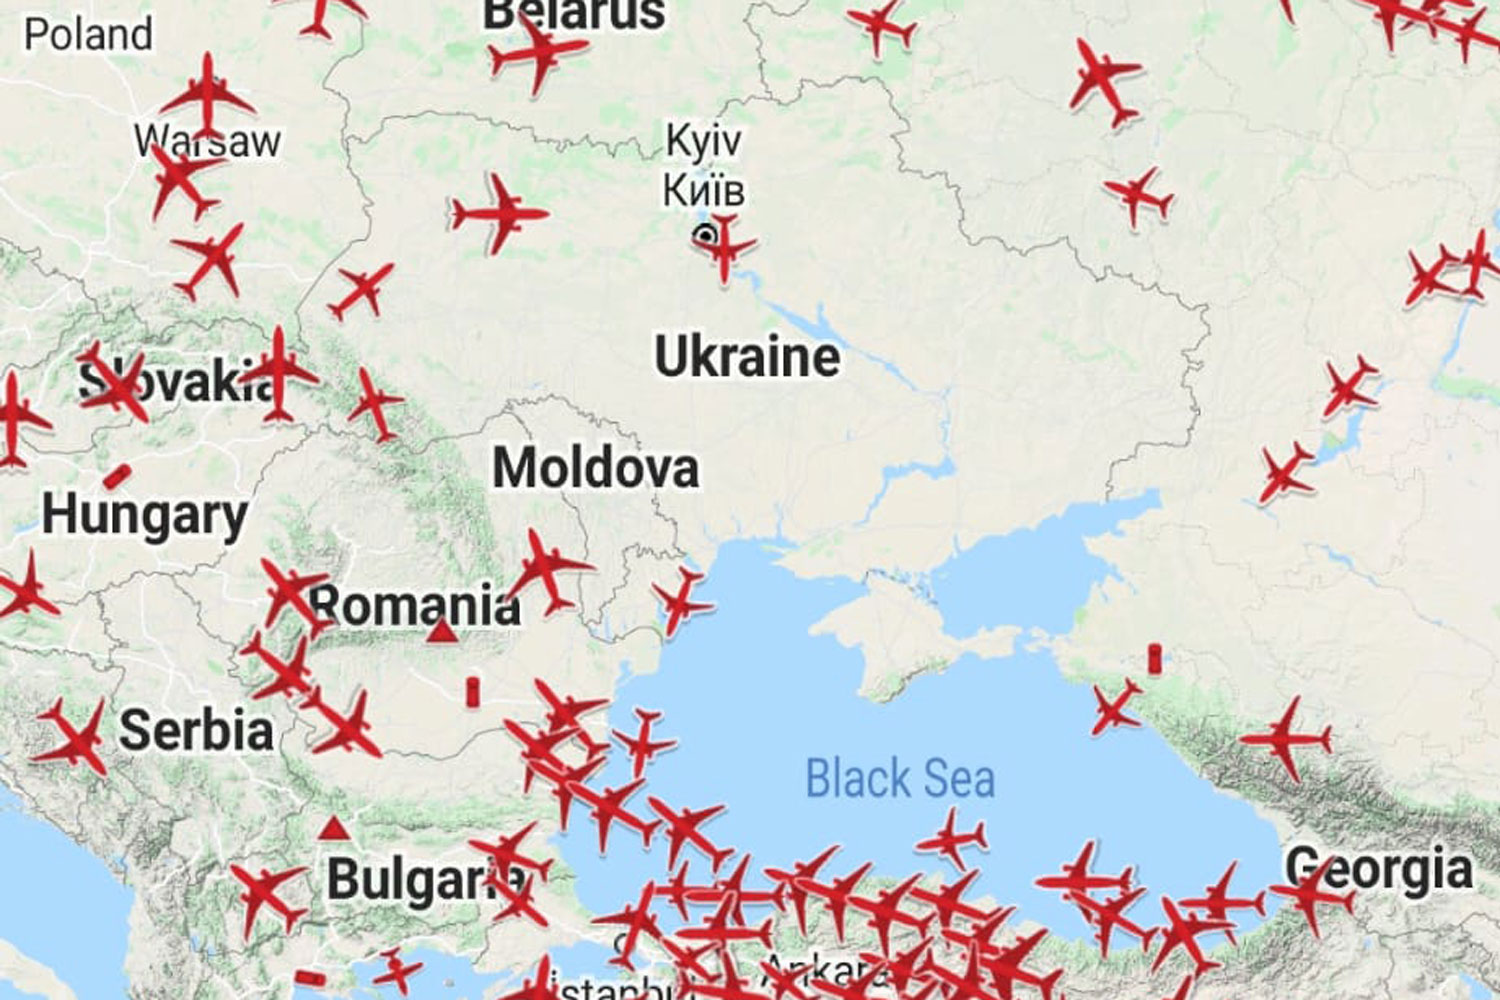 Flight Radars Show Airlines Are Giving Ukraine A Wide Berth